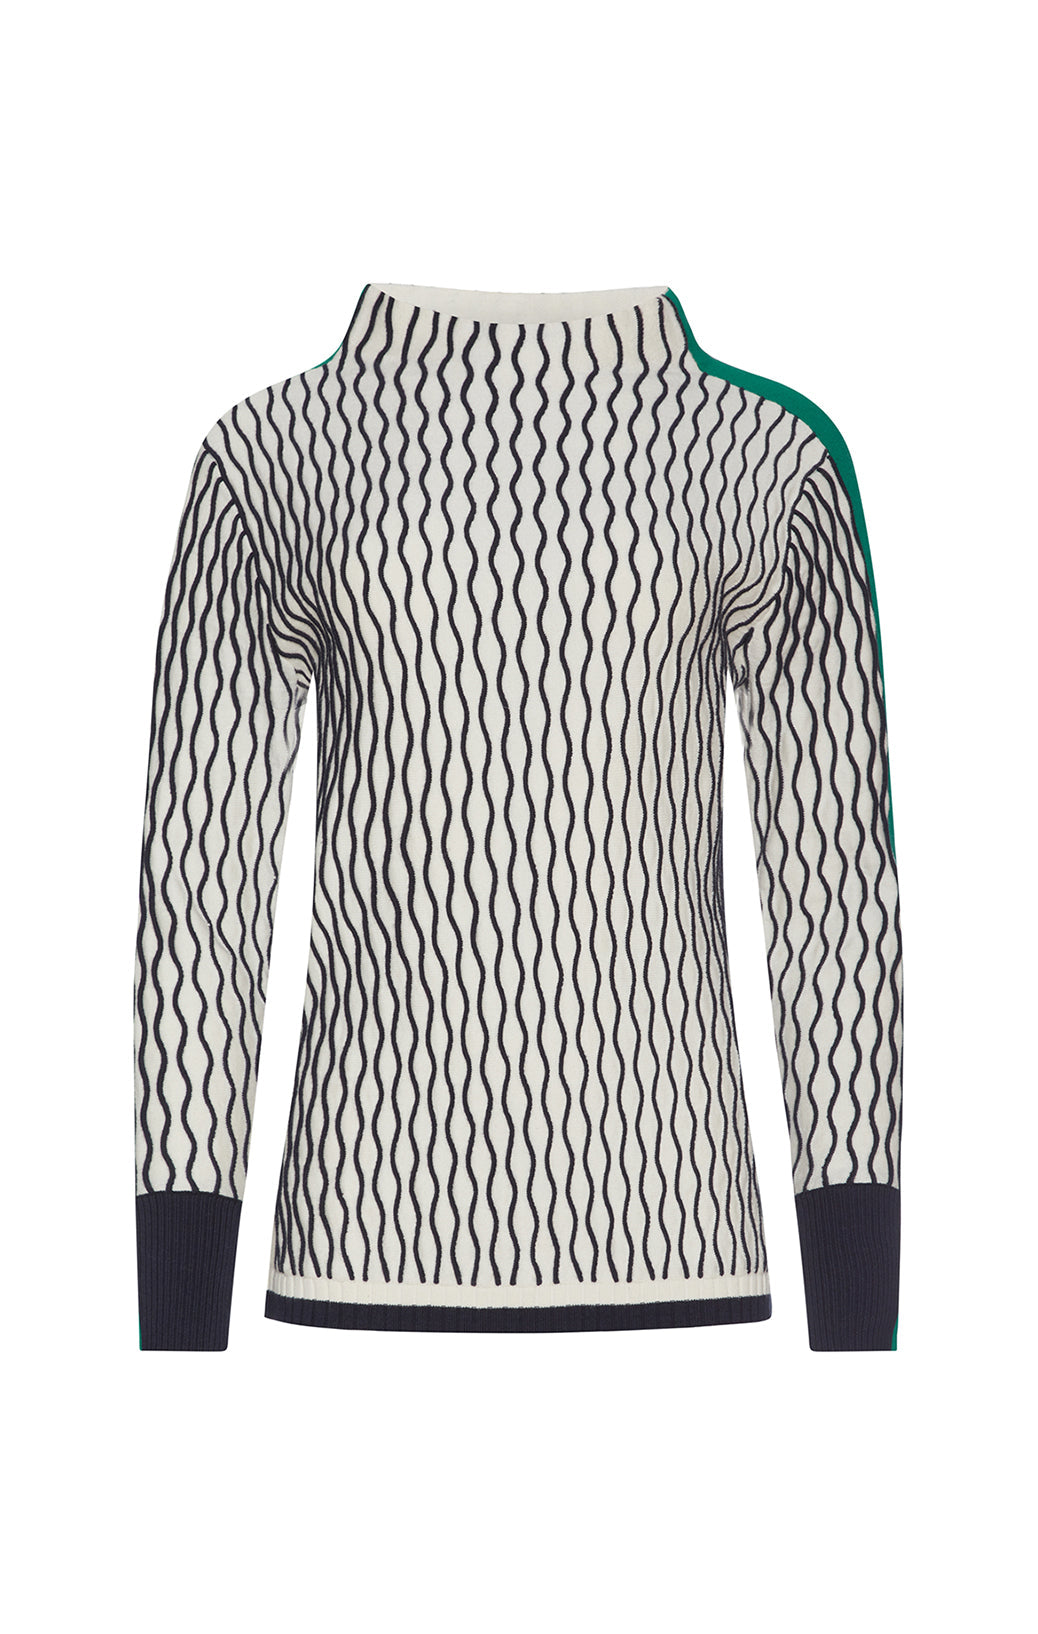 Buttercream - Pearl-Trimmed Mock Turtleneck Sweater - Product Image